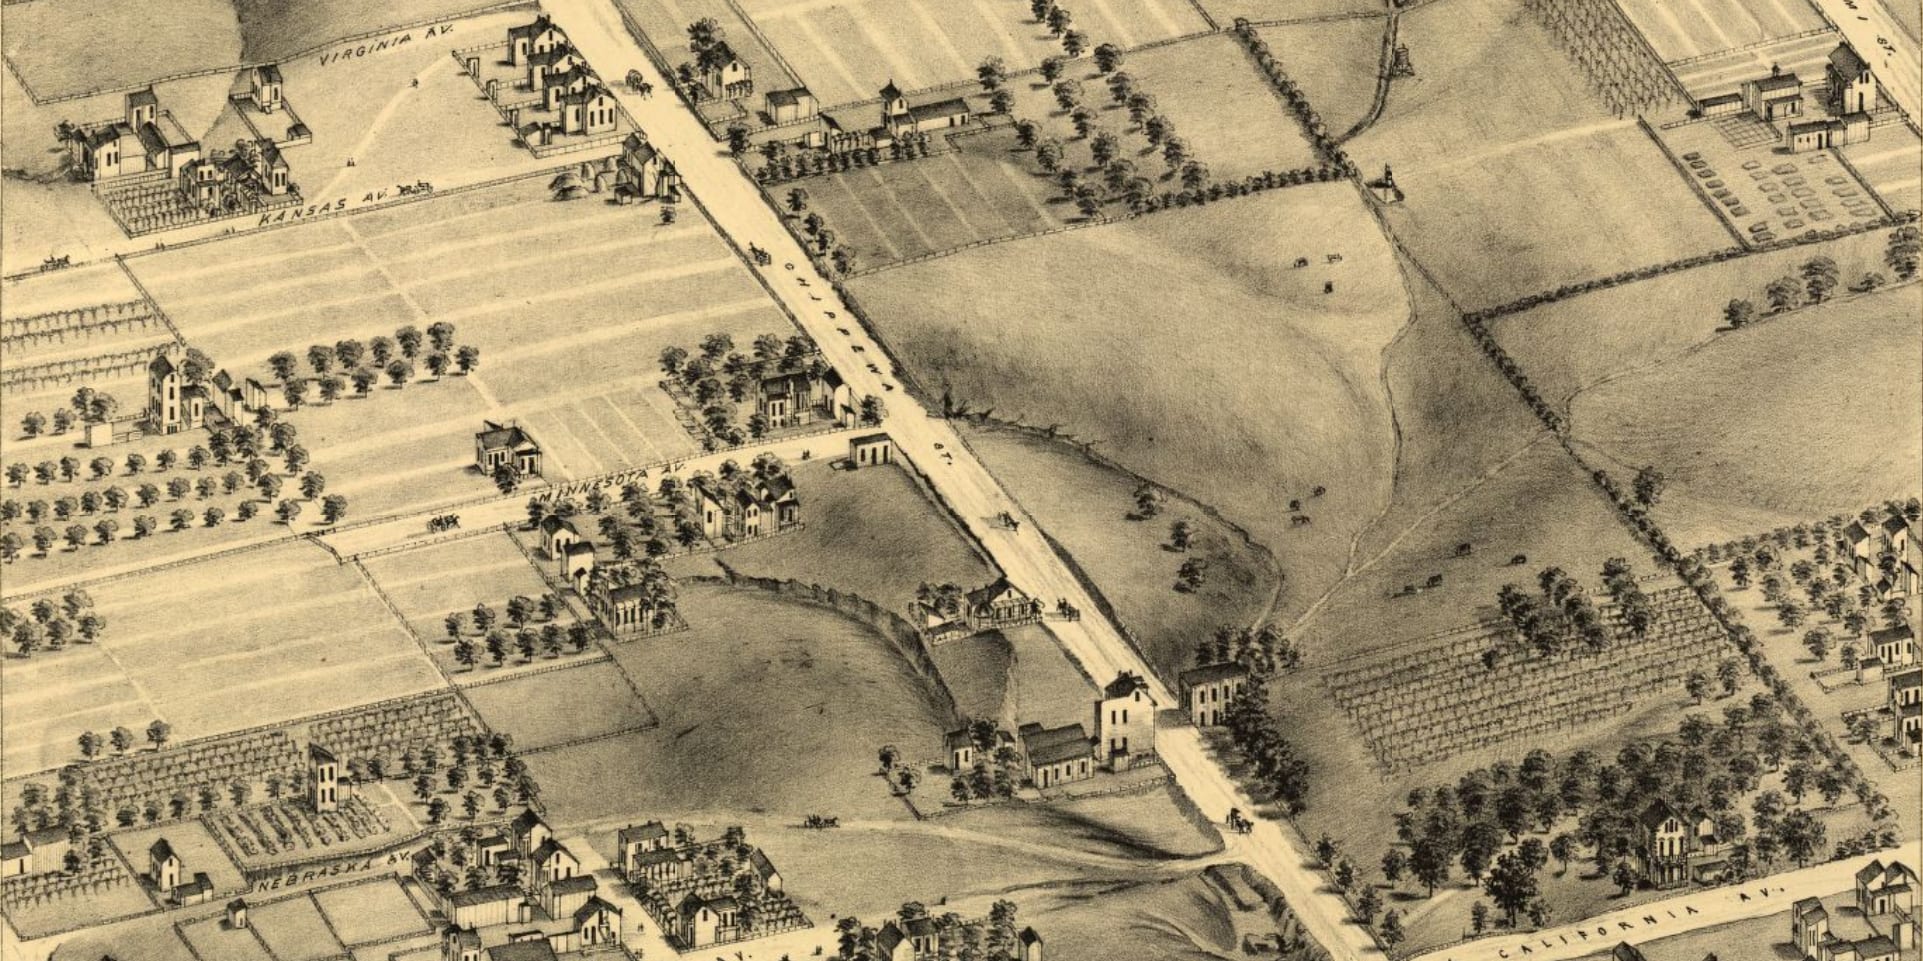 Chippewa Street in 1875, from Compton & Dry's Pictorial St. Louis.